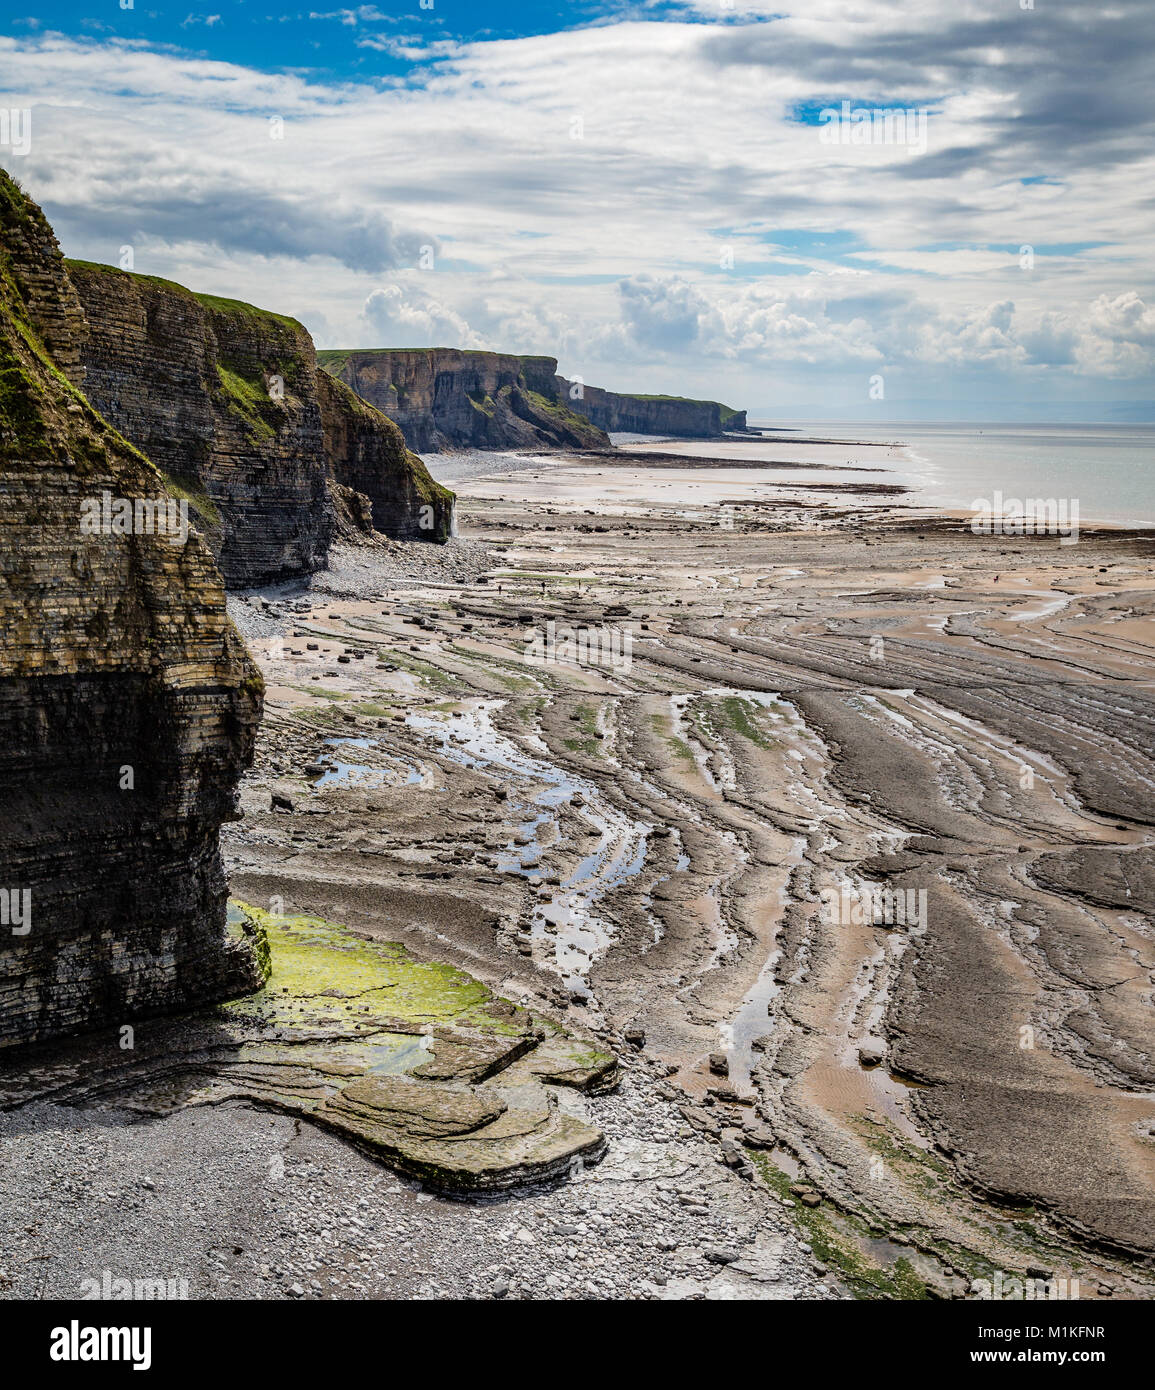 Wave cut pavement of Jurassic lias limestone at low tide near Nash Point on the Glamorgan Heritage Coast of South Wales UK Stock Photo